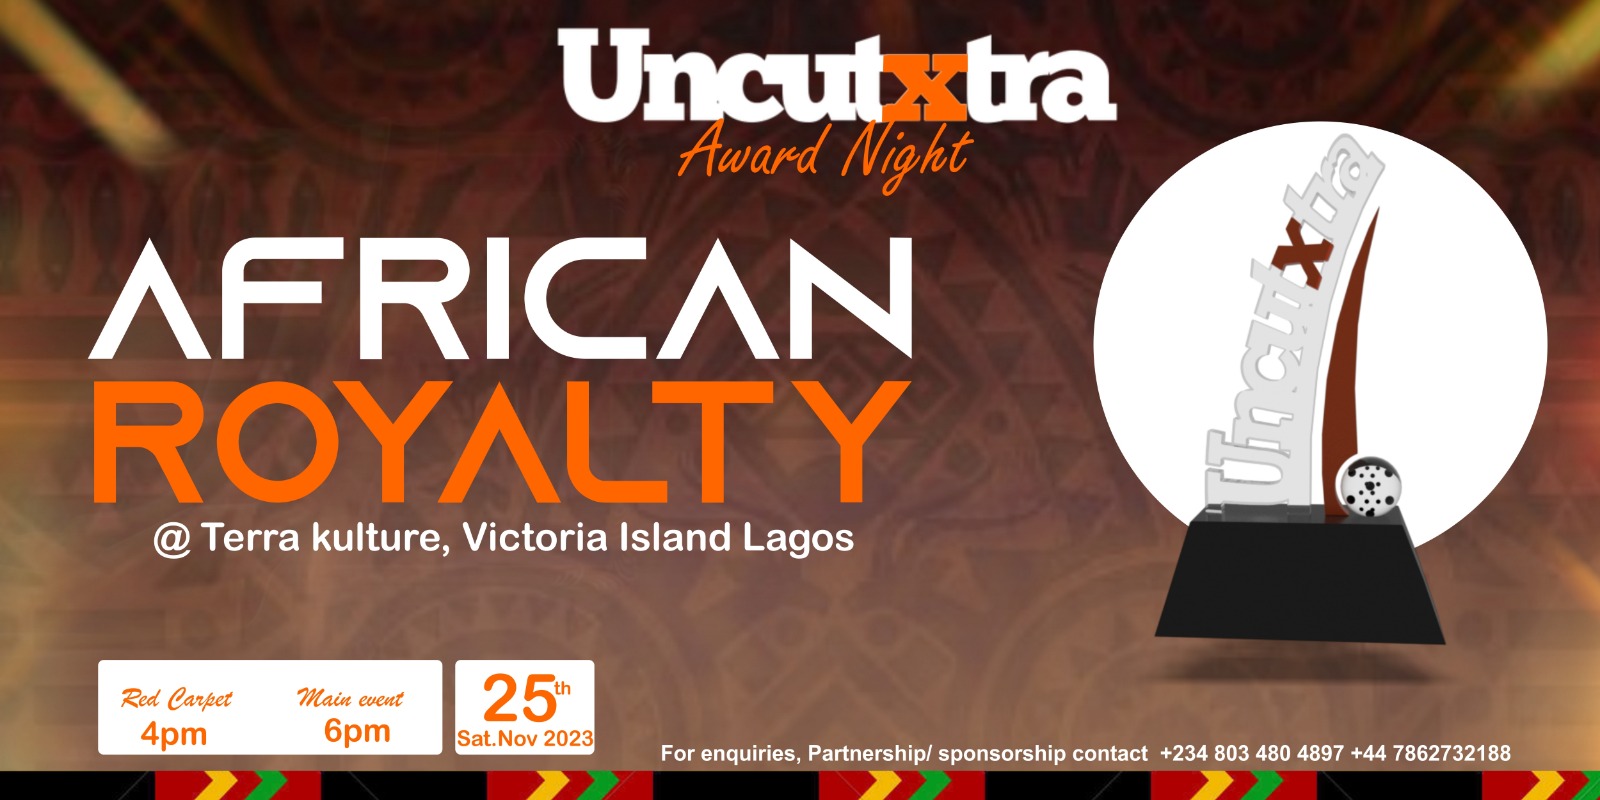 Uncutxtra Magazines African Royalty 2023 Post free event in Nigeria using tickethub.ng, buy and sell tickets to event